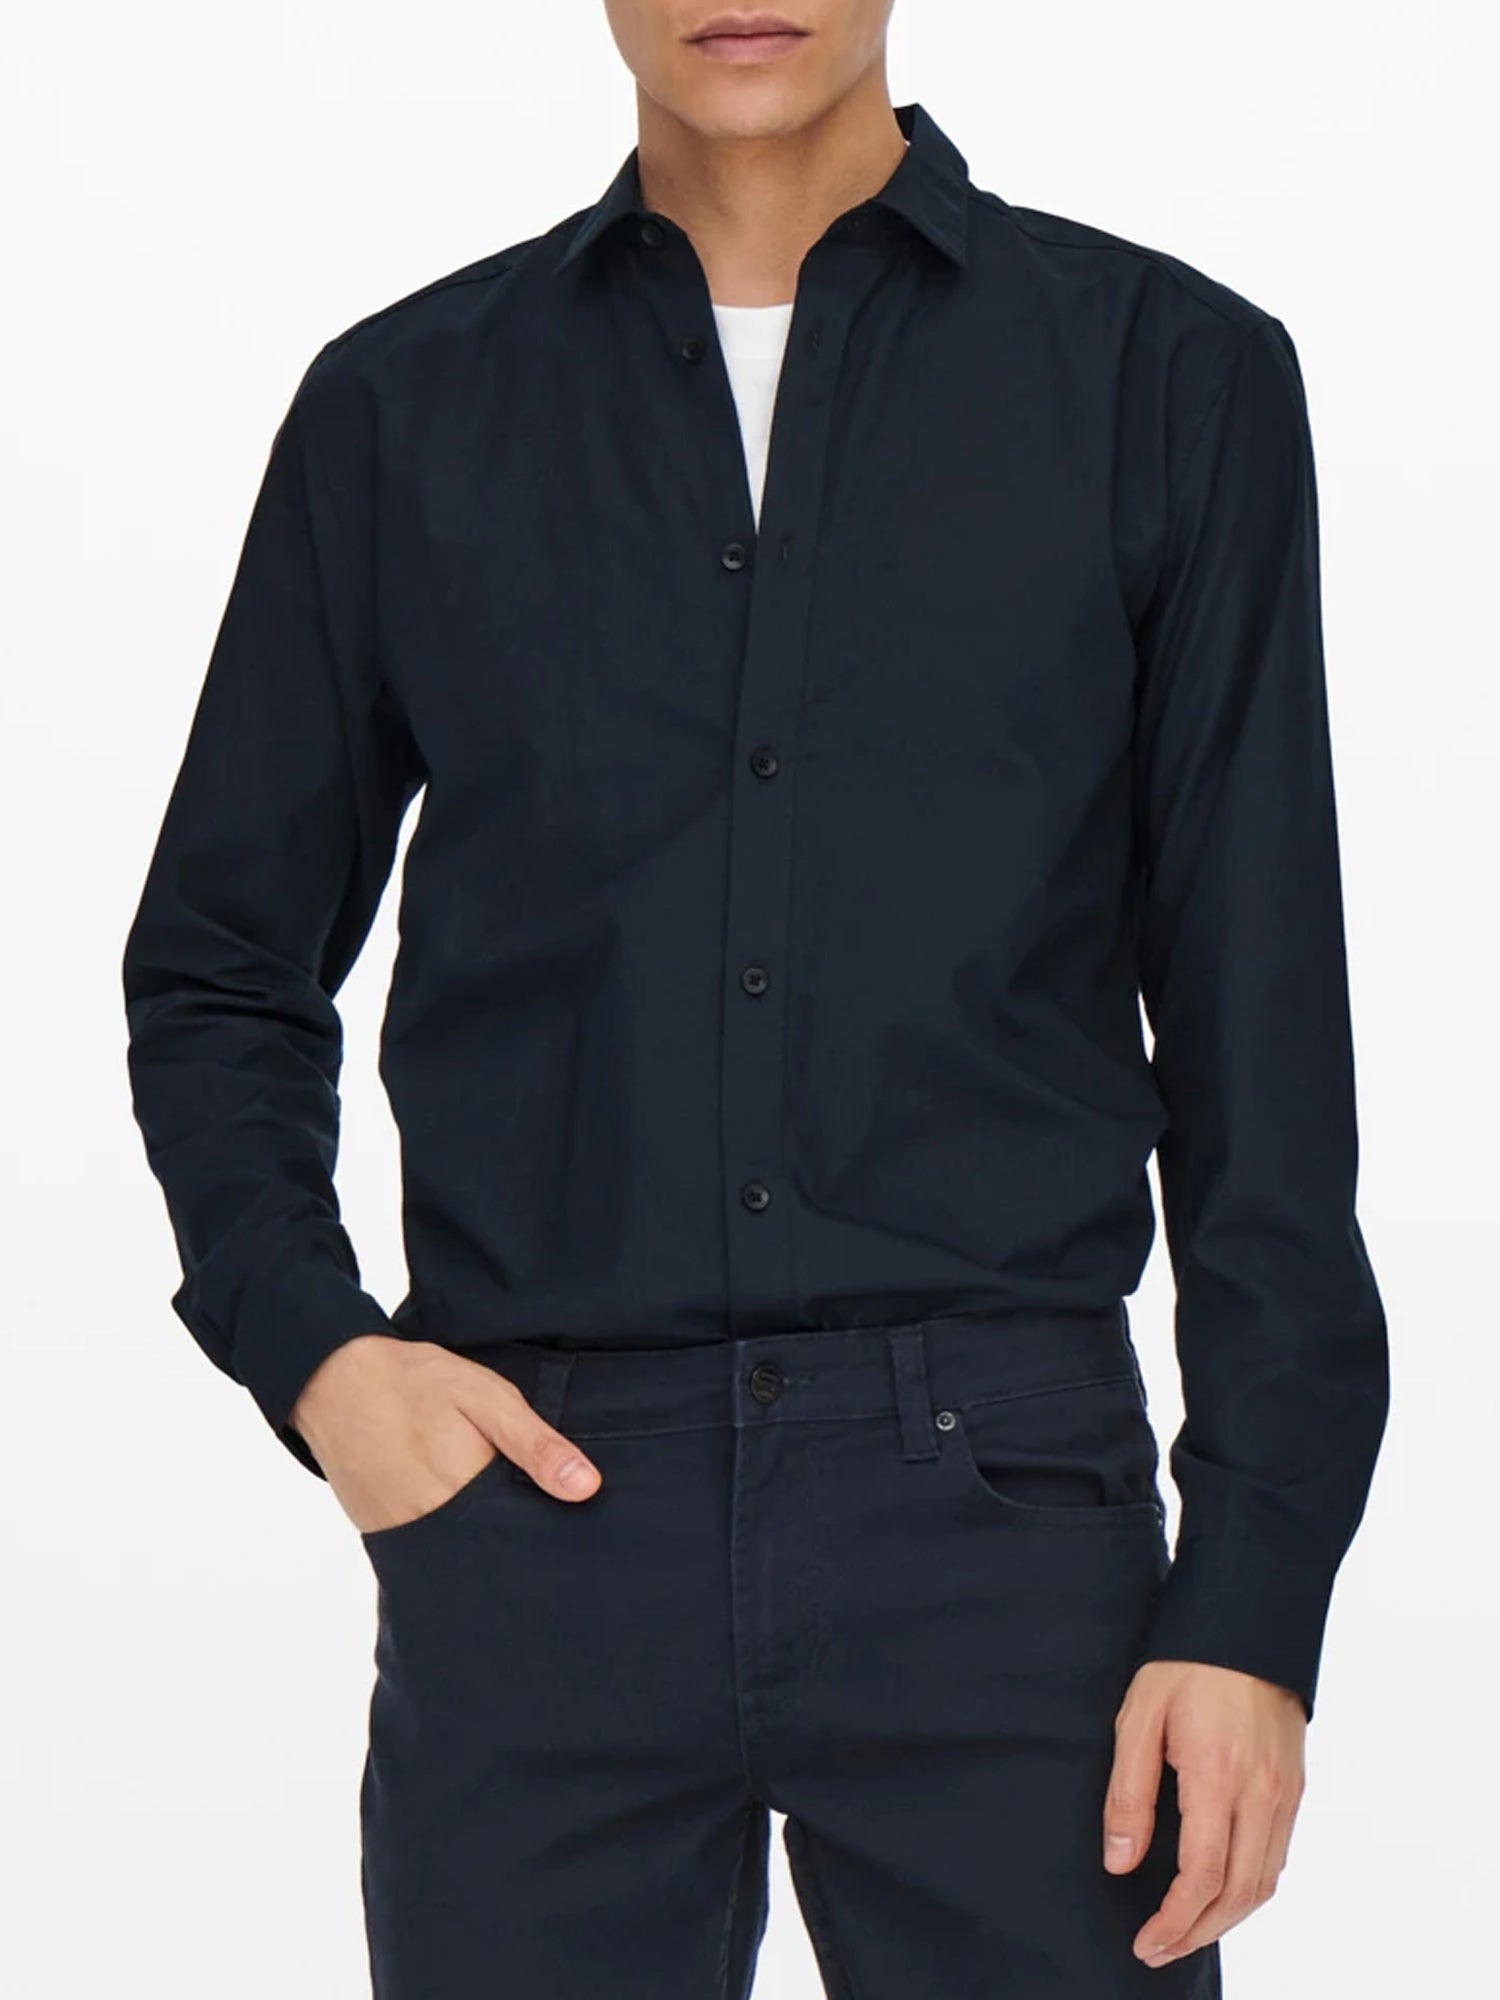 ONLY&SONS CAMICIA SLIM FIT BLU